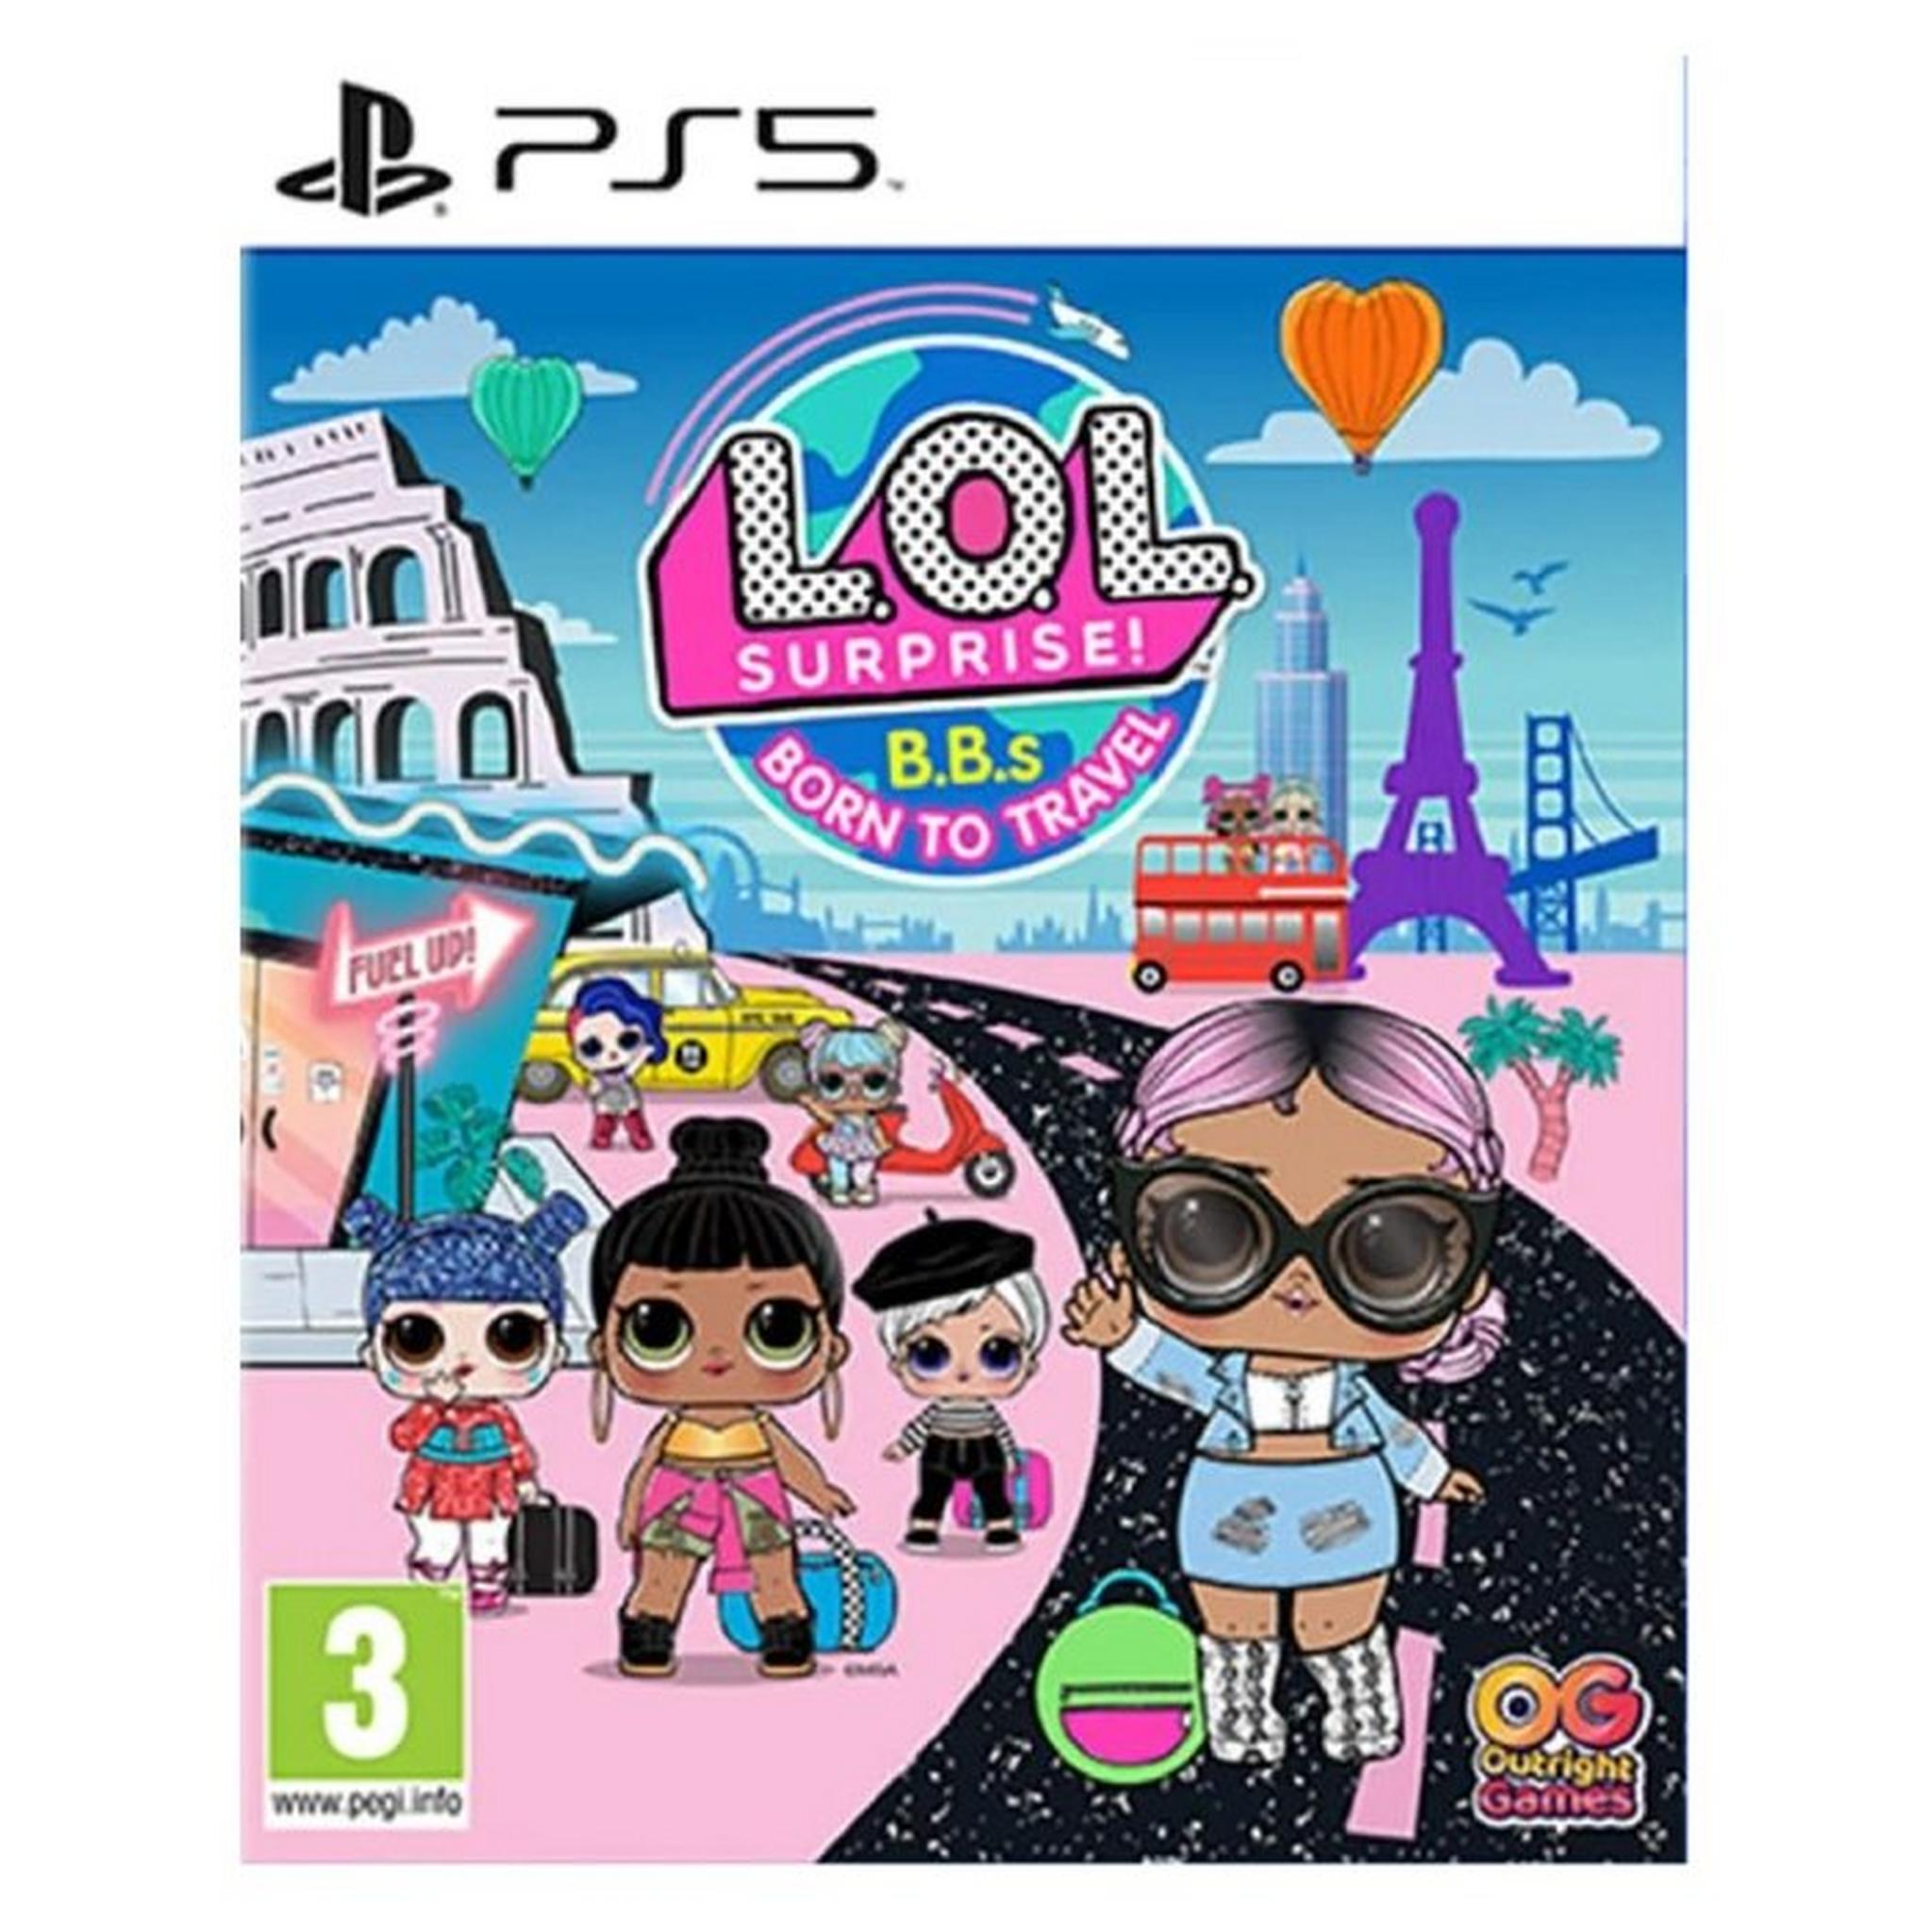 L.O.L. Surprise! B.B.s Born To Travel  - PlayStation 5 Game